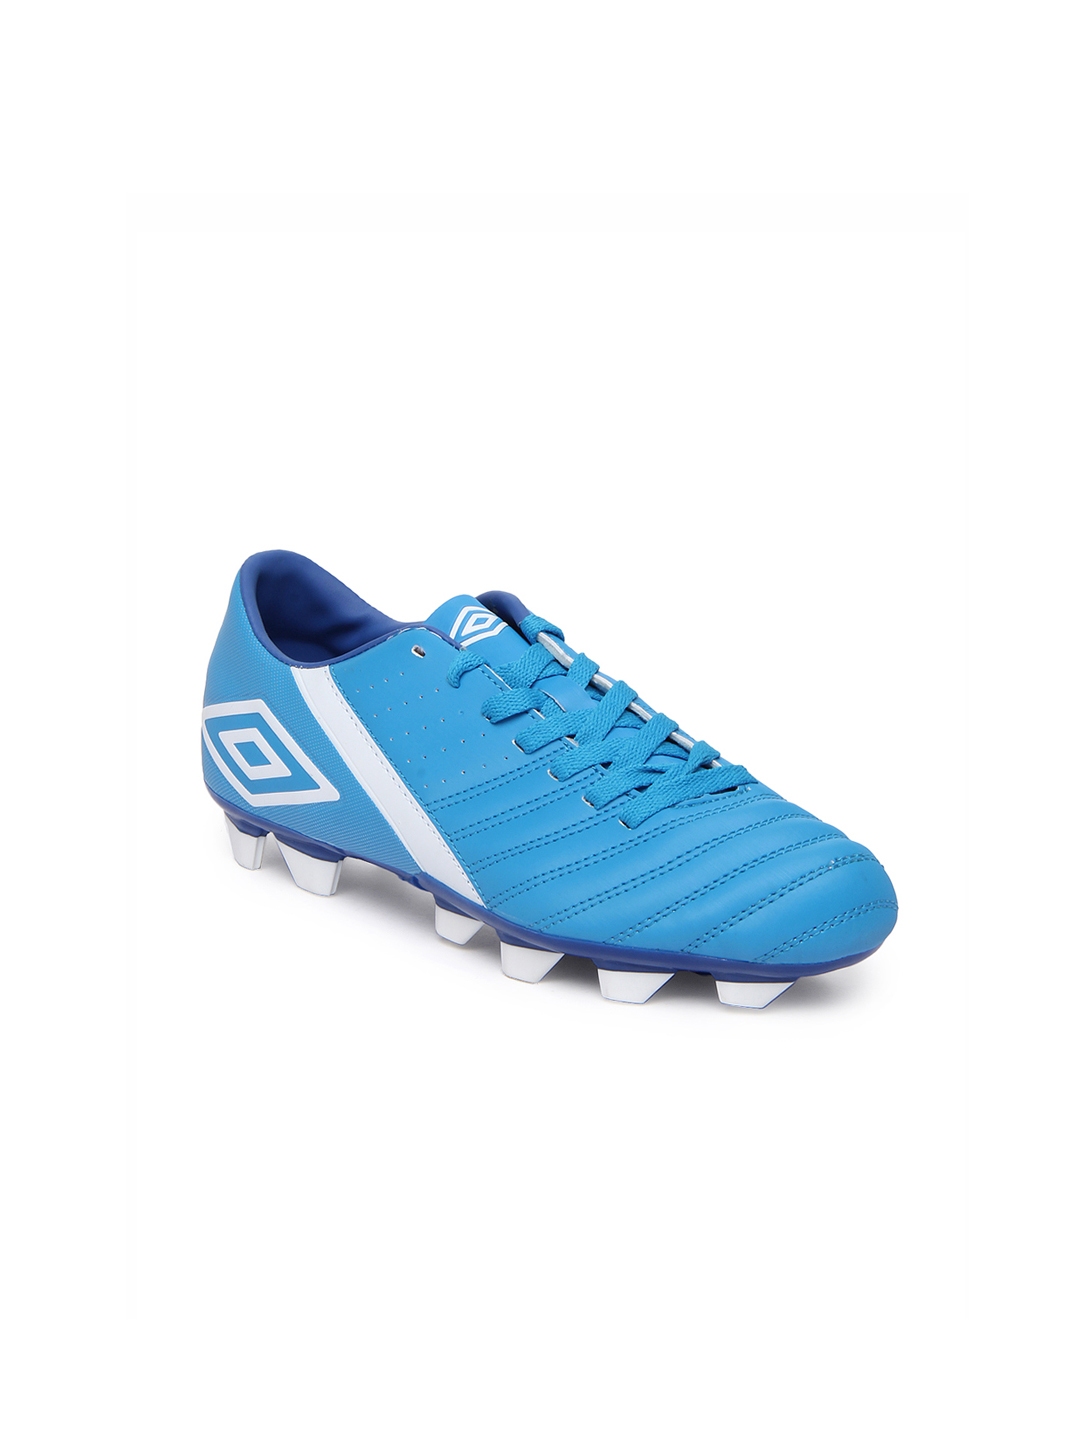 Buy Umbro Boys Blue Extremis FG J Sports Shoes - Sports Shoes for Boys ...